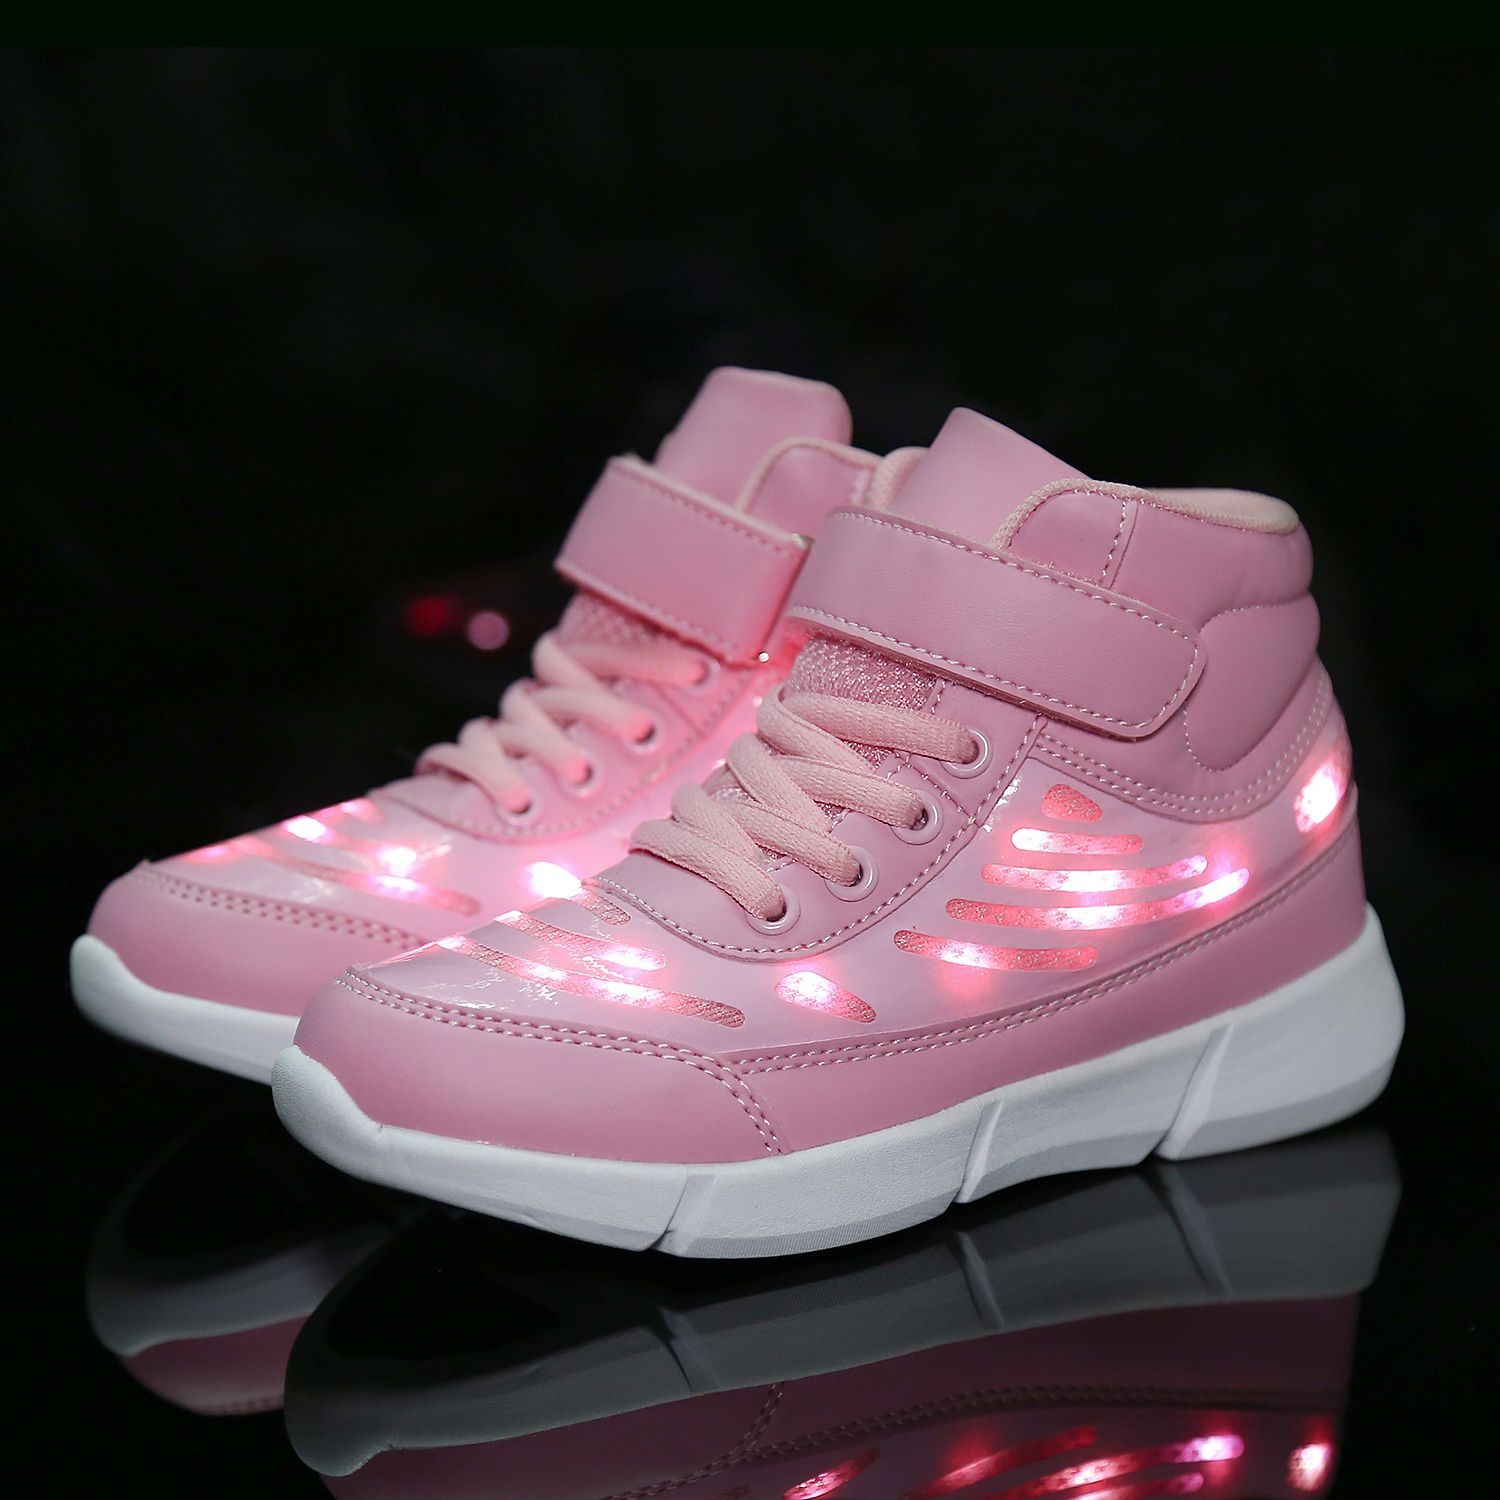 nike led light shoes price in india